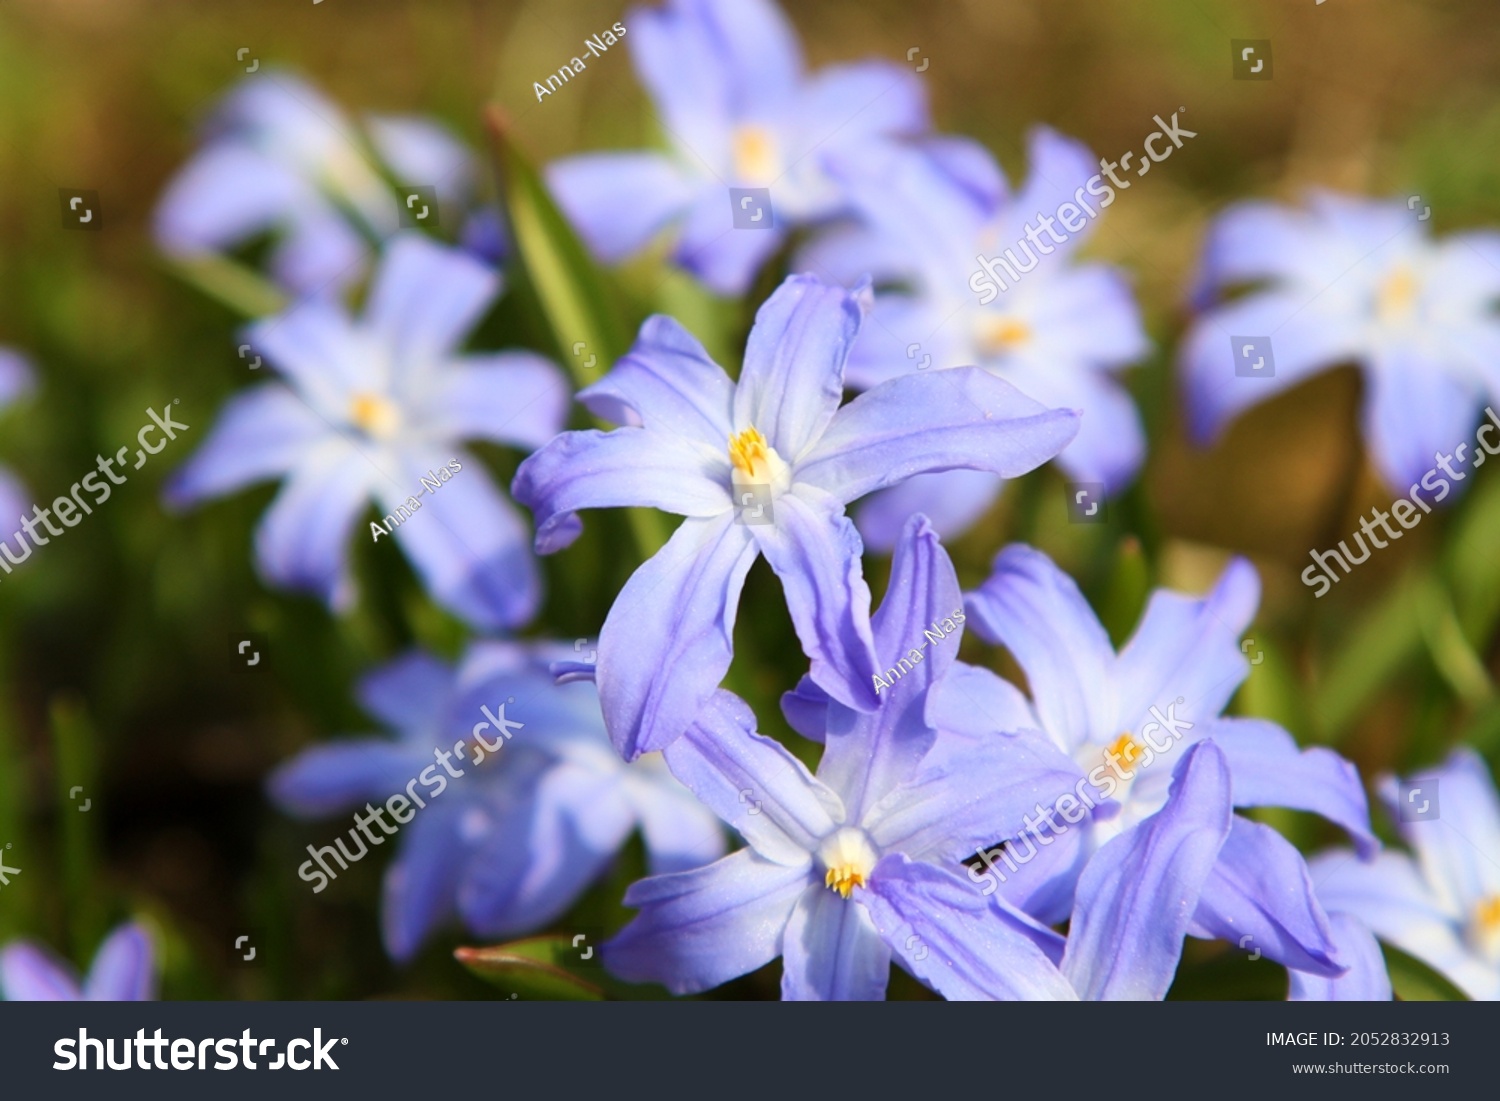 Blue scylla flowers in the early spring with slightly unfocused background. High quality photo #2052832913